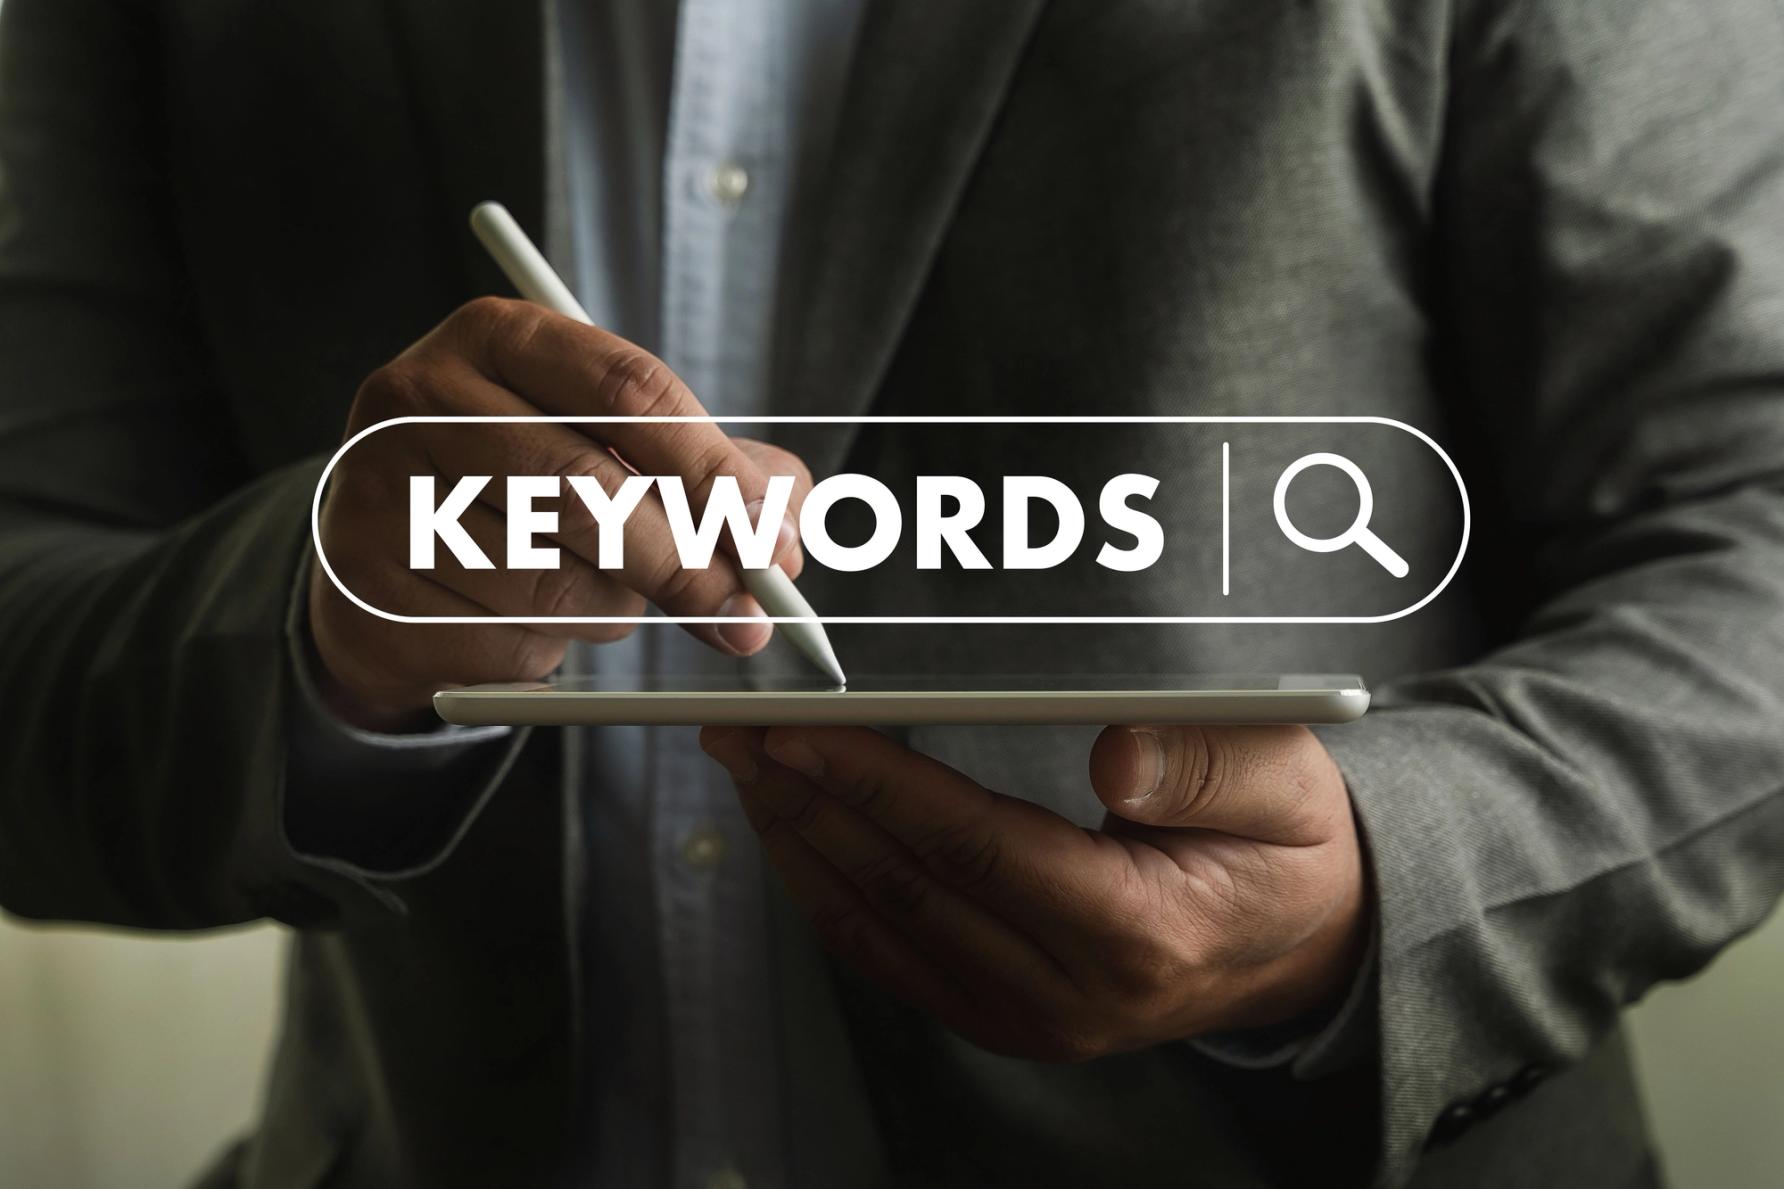 What are keywords and how do you use them?